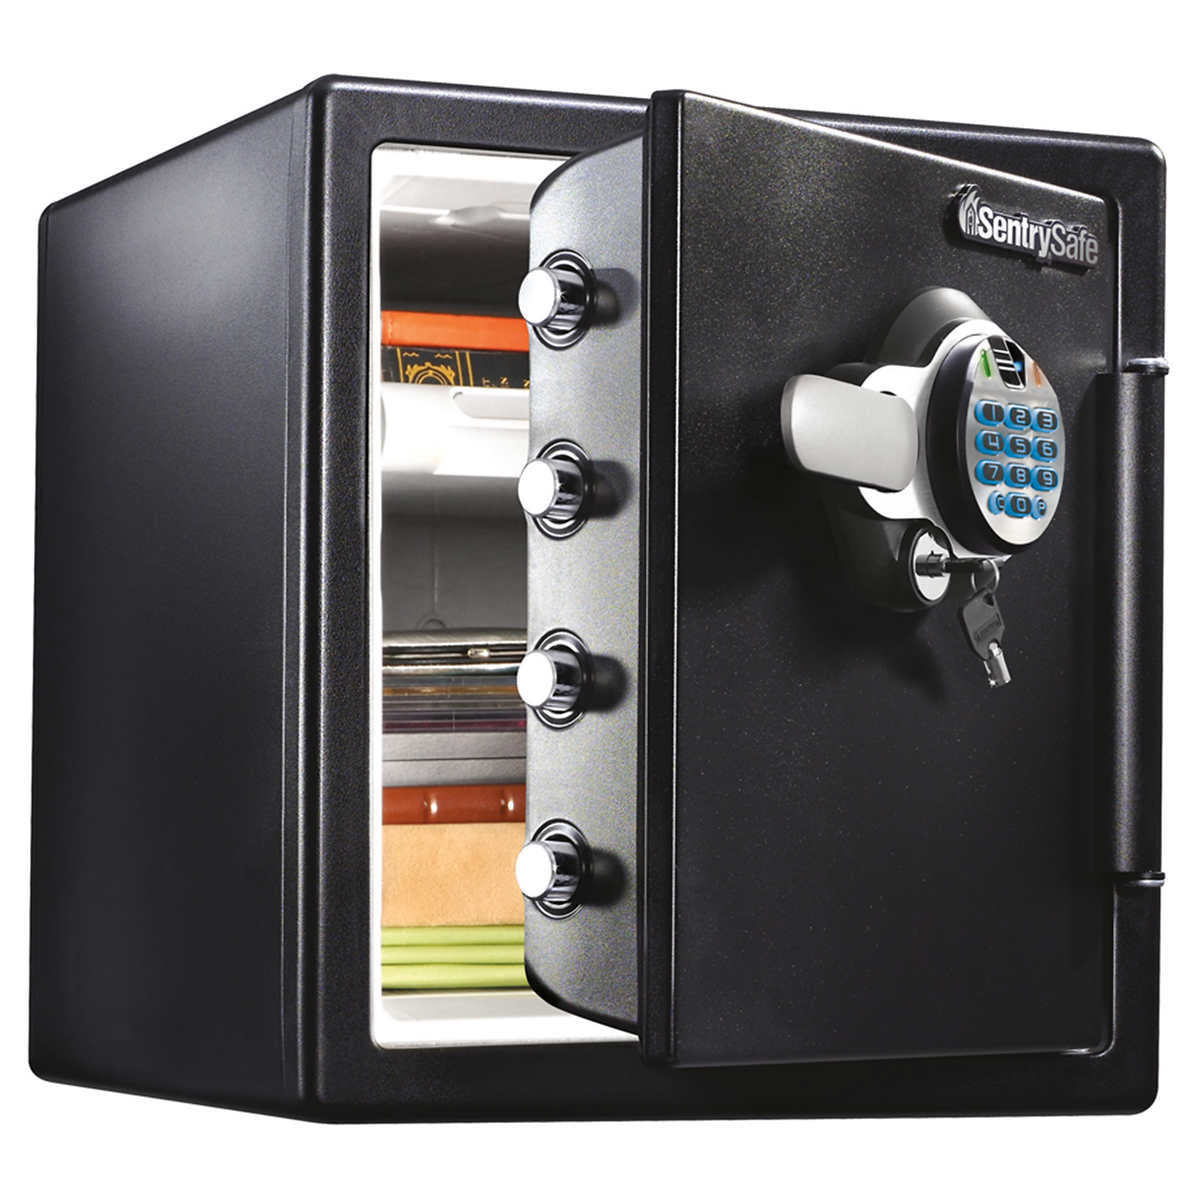 SentrySafe Biometric Digital Fire/Water Safe, locked, sold as is